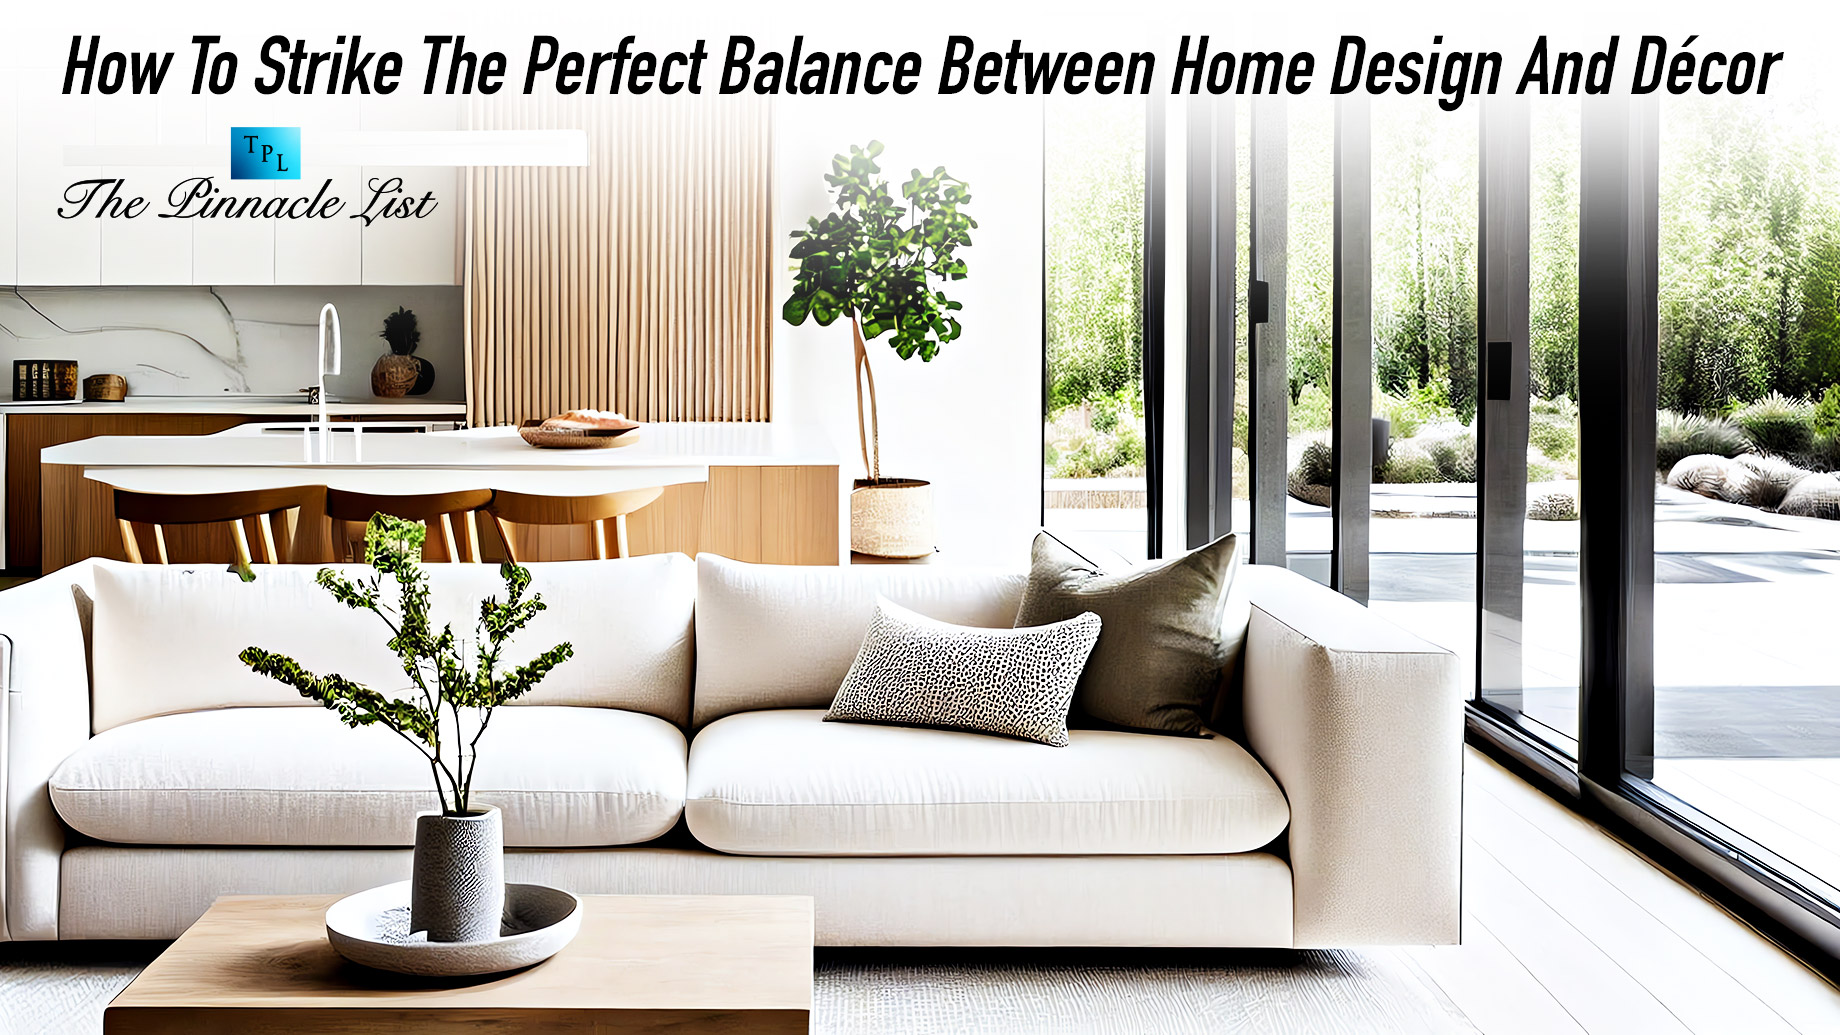 How To Strike The Perfect Balance Between Home Design And Décor